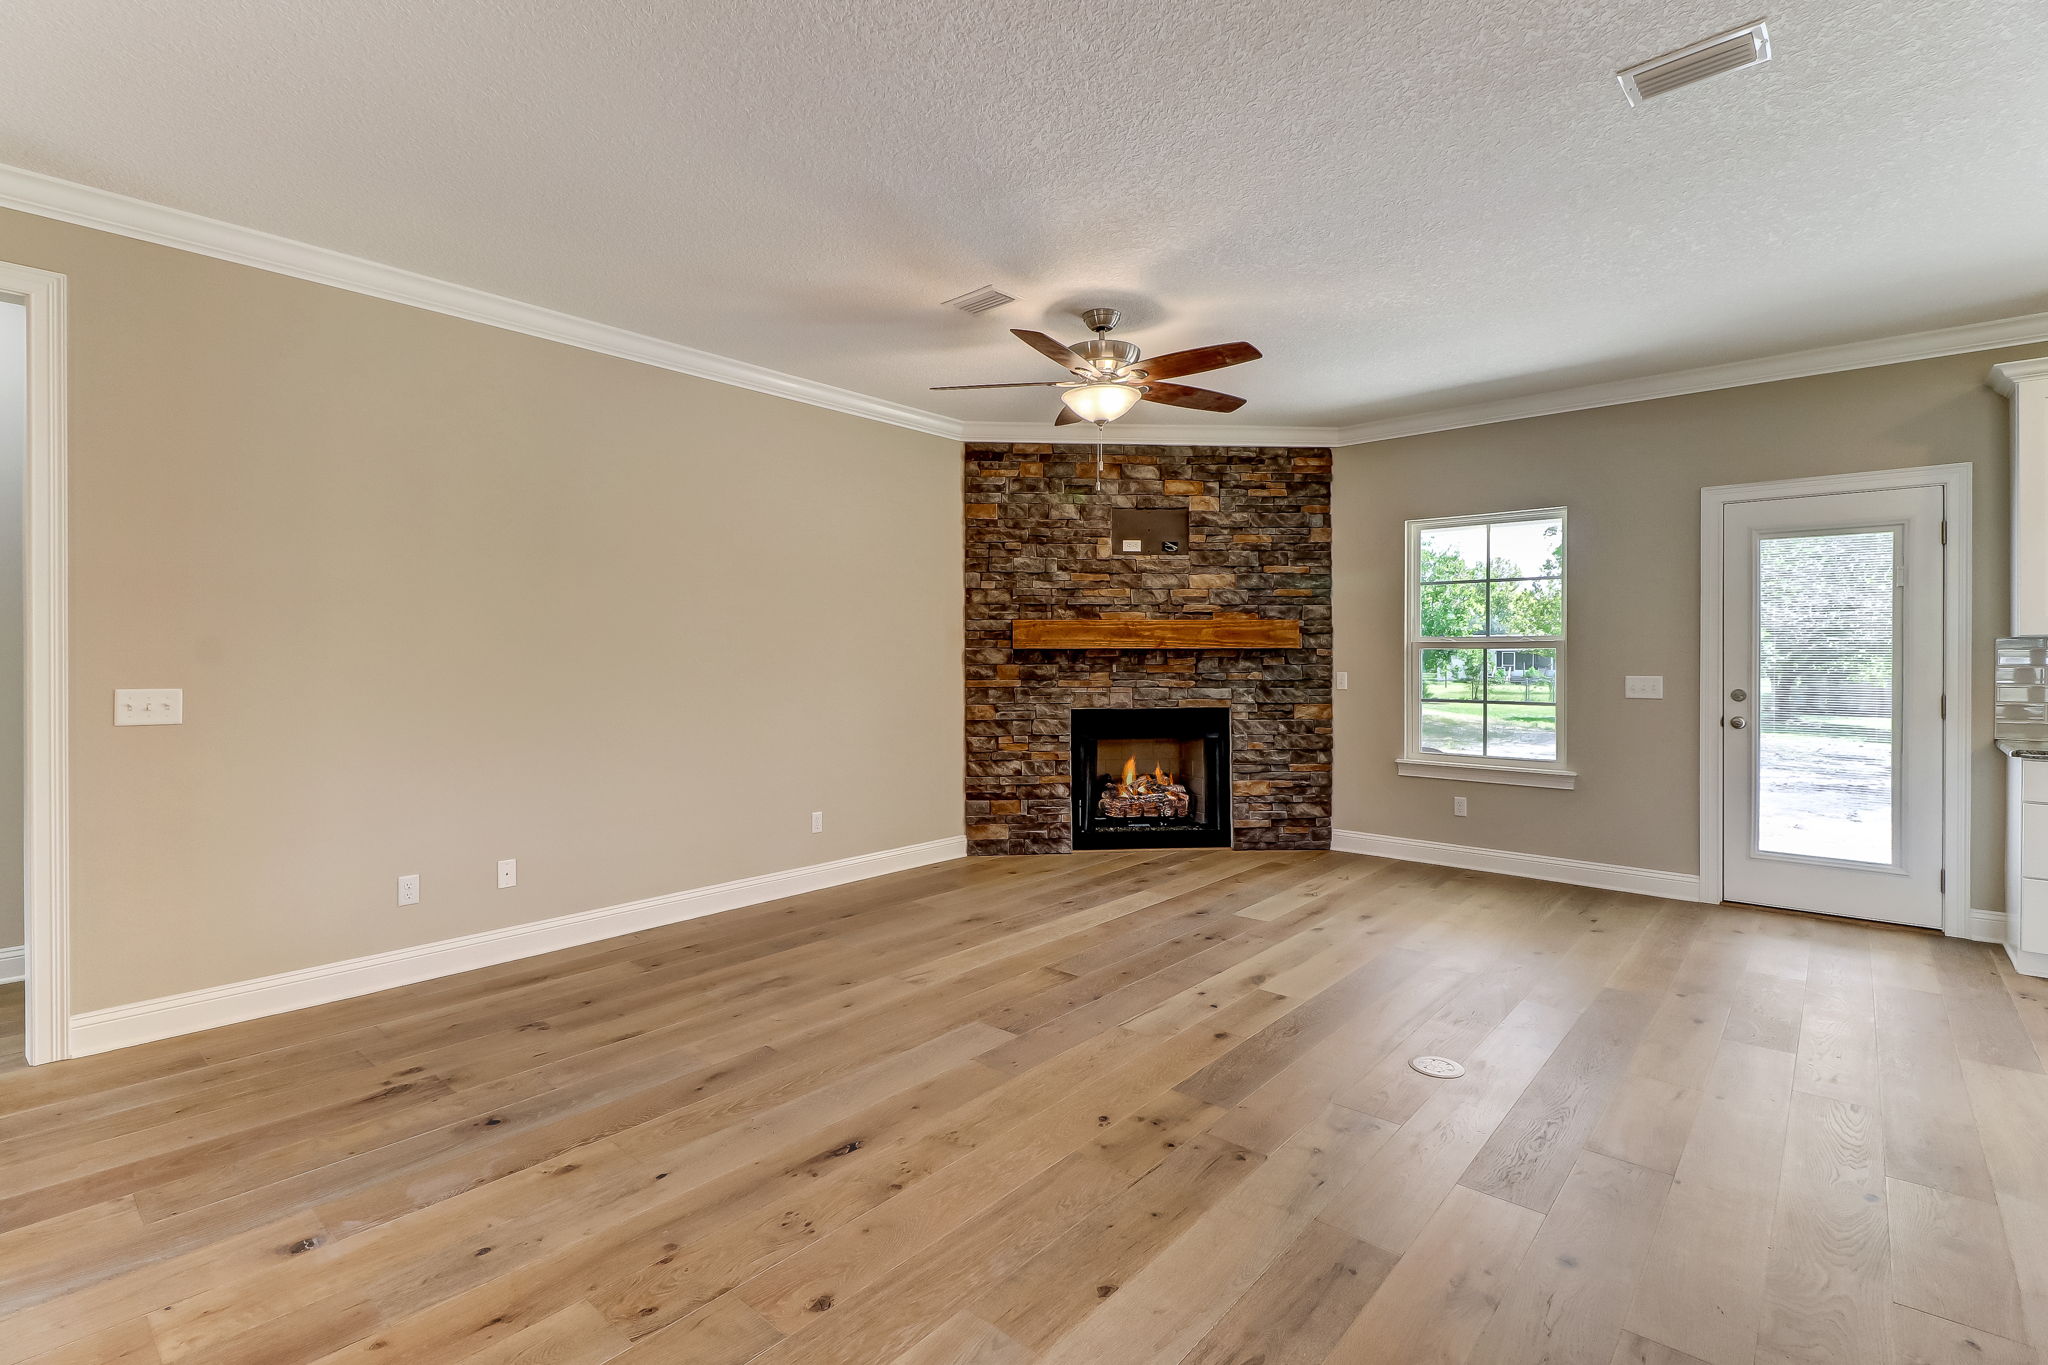 White Oak hardwood floors and a natural stone gas fireplace greet you, creating an attractive and inviting warm welcome.